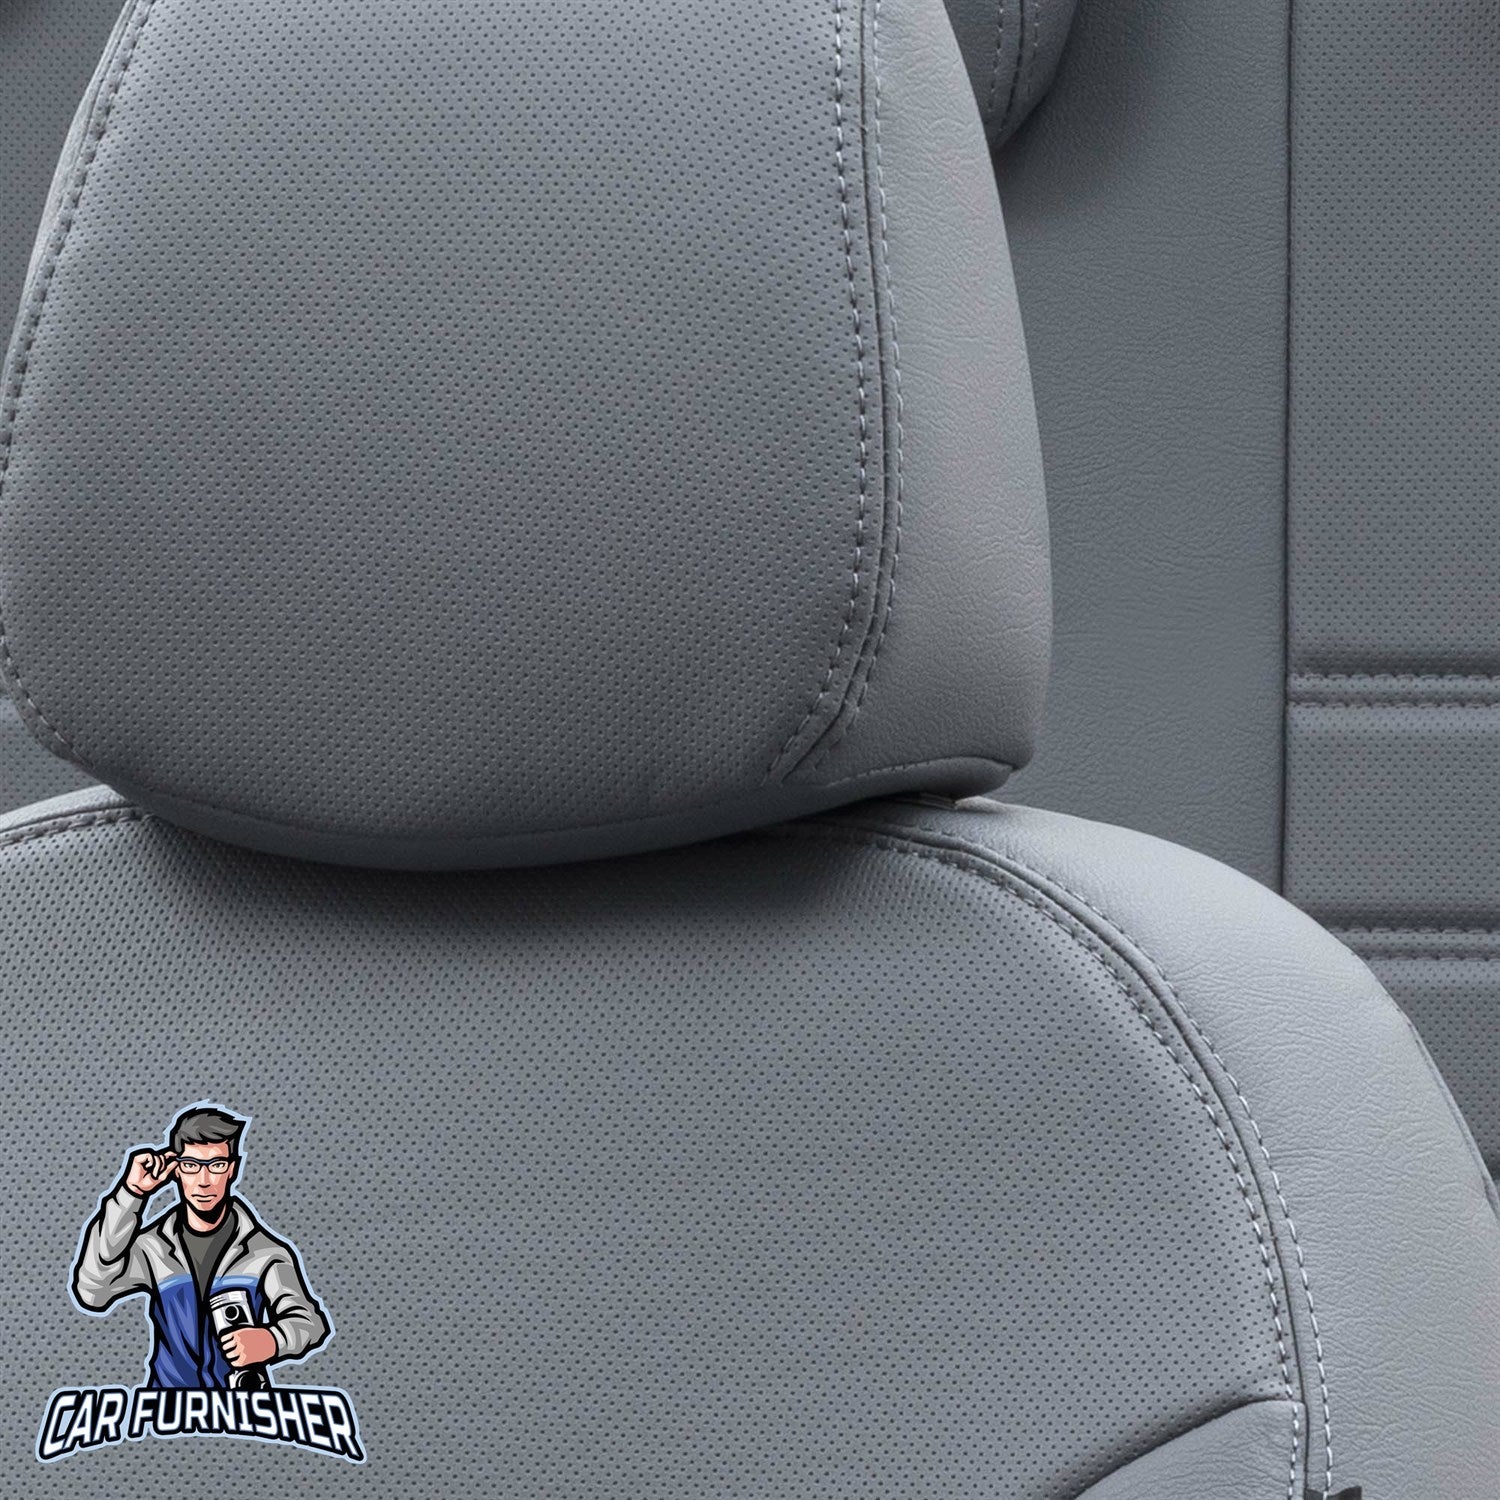 Mercedes Citan Seat Covers Istanbul Leather Design Smoked Leather